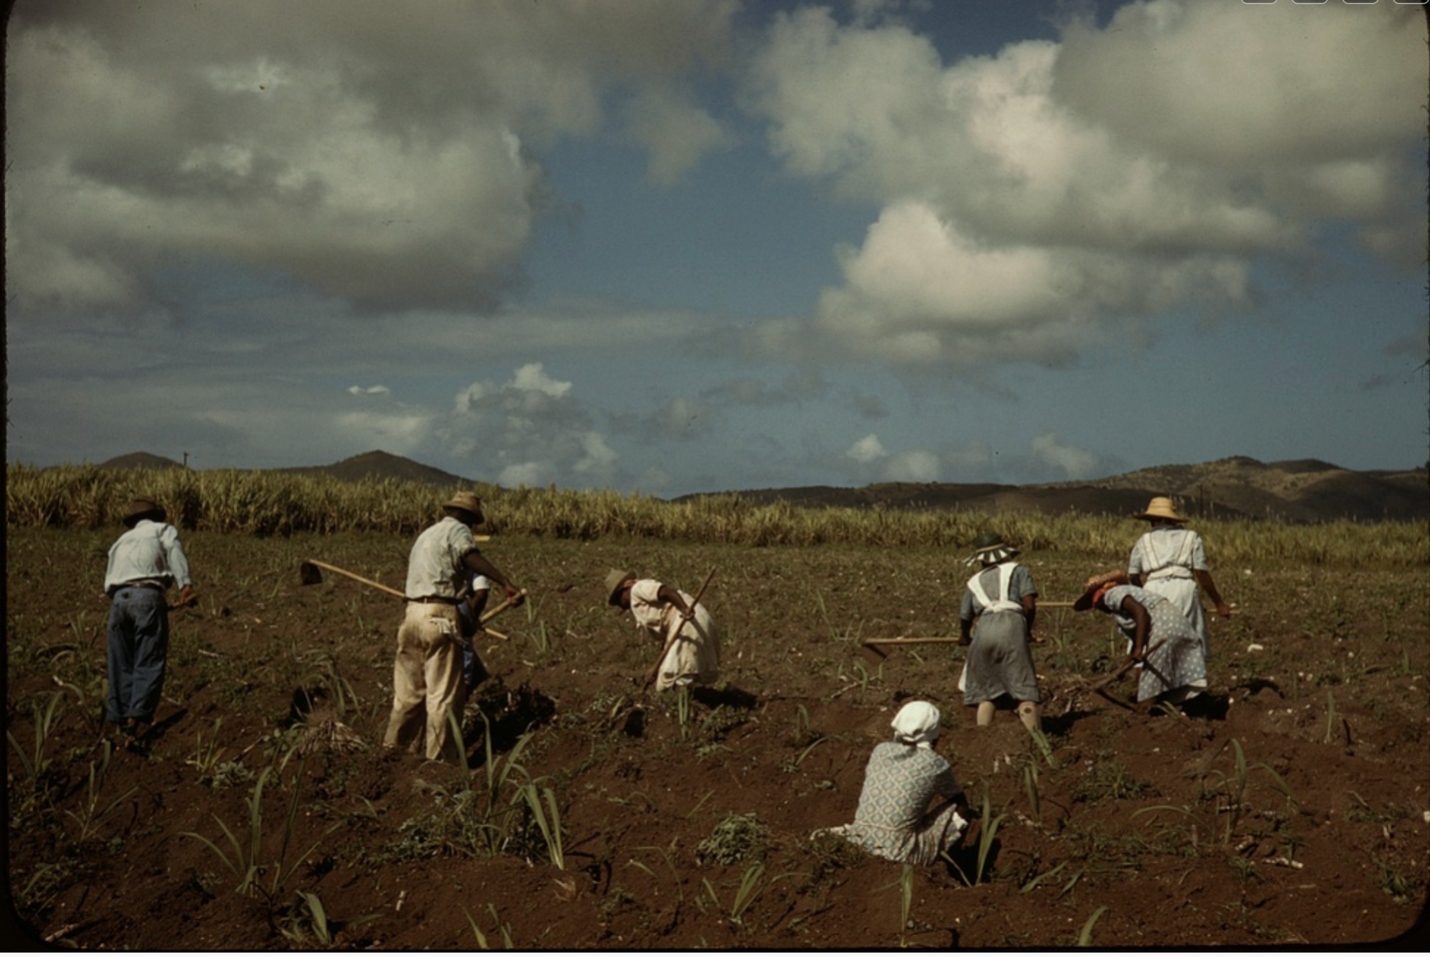 Cultivation of sugarcane on St. Croix, circa 1941. (Frank Delano photo/Library of Congress Archives)